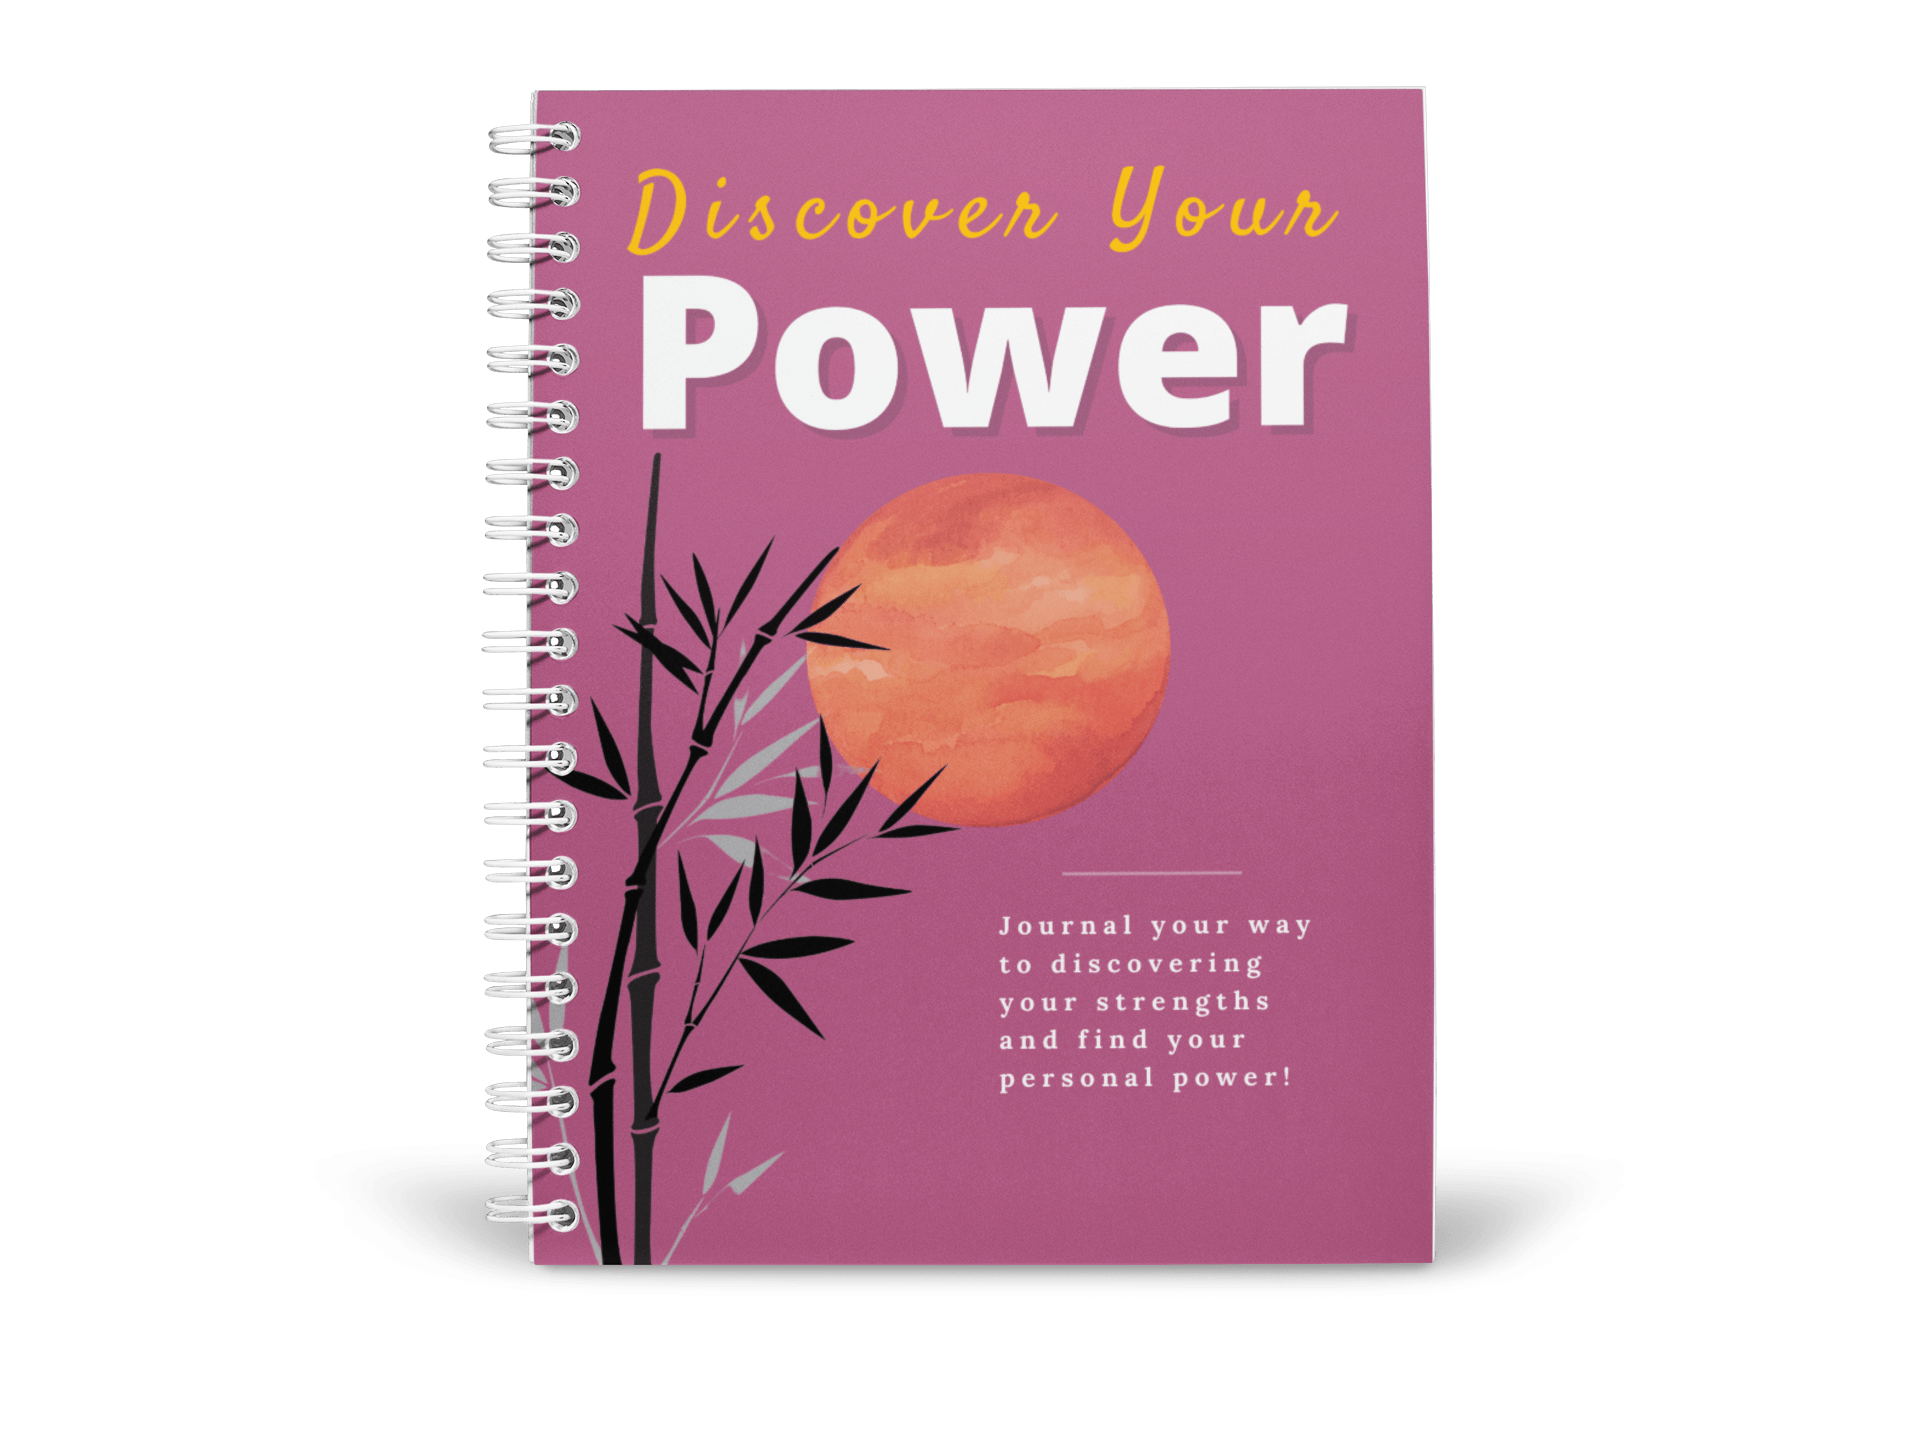 Discover your power journal image